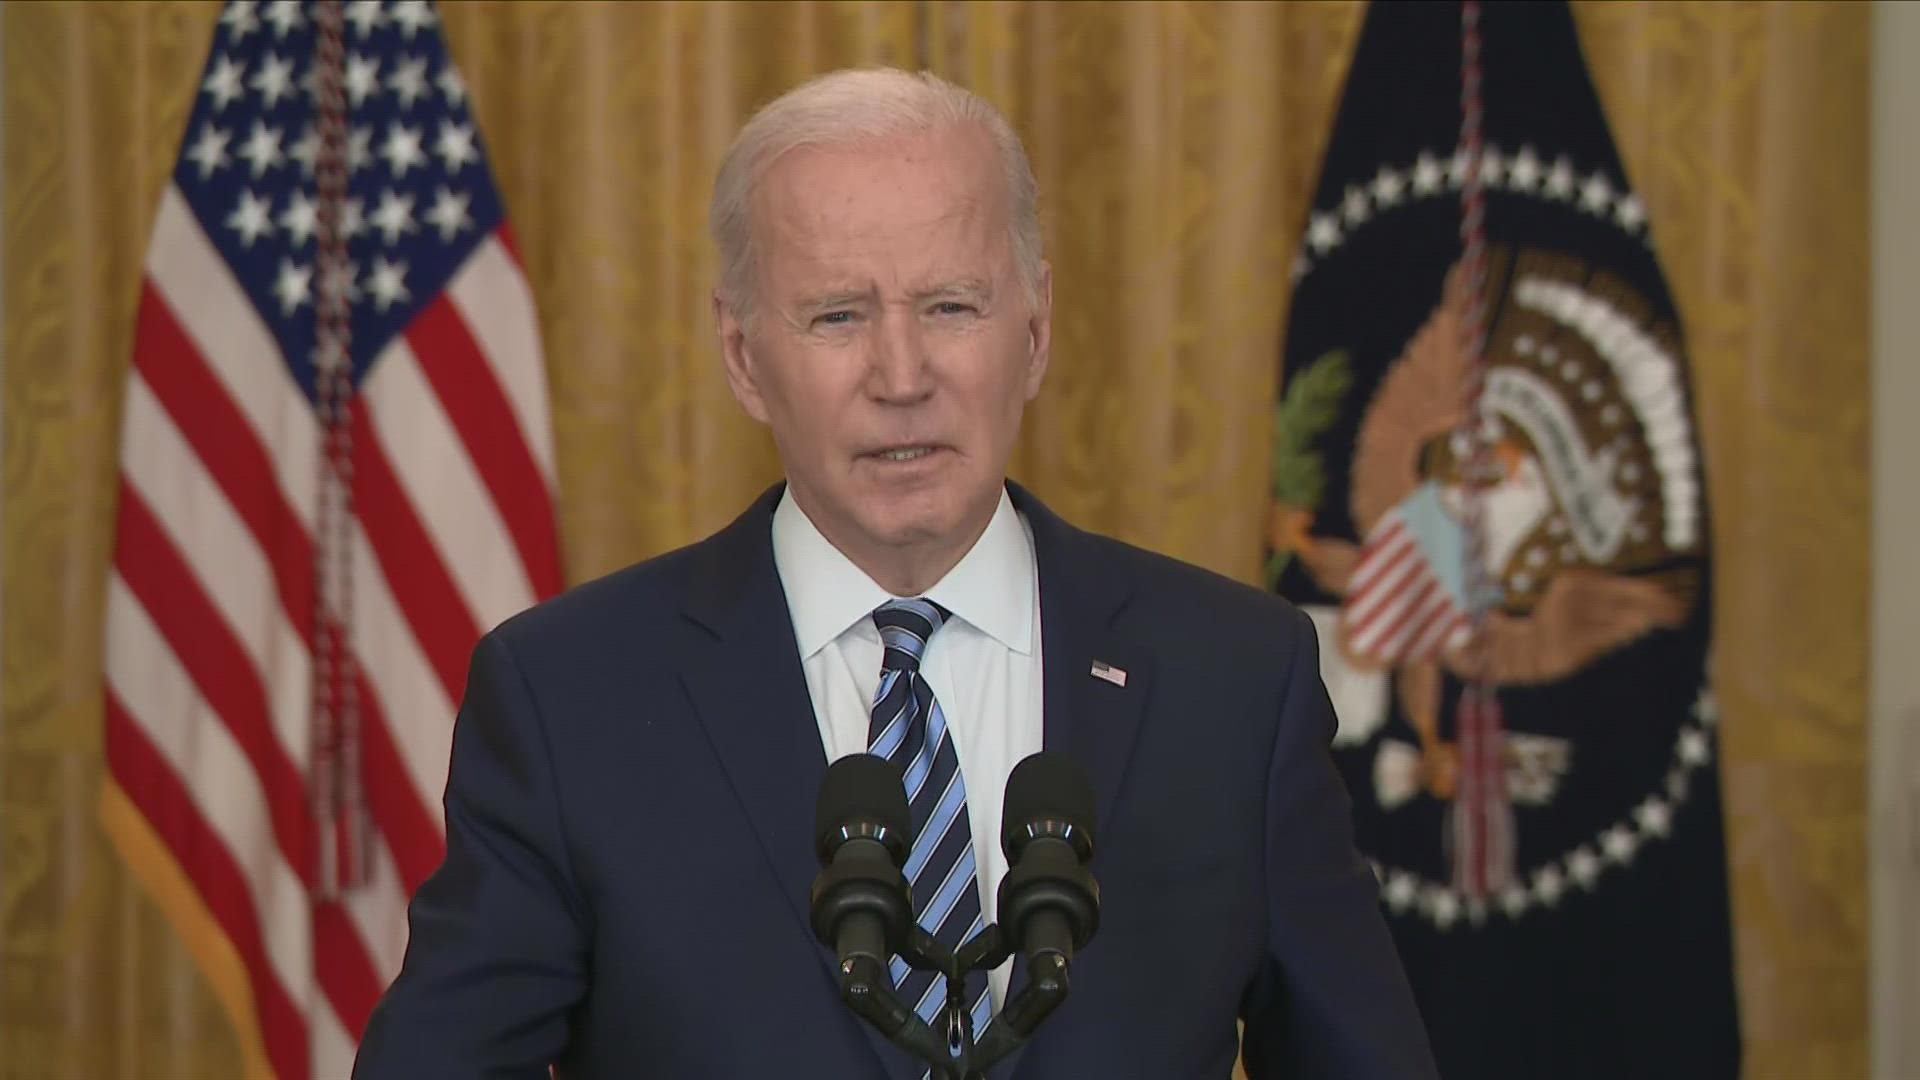 Biden said Putin's actions will "end up costing Russia dearly, economically and strategically."